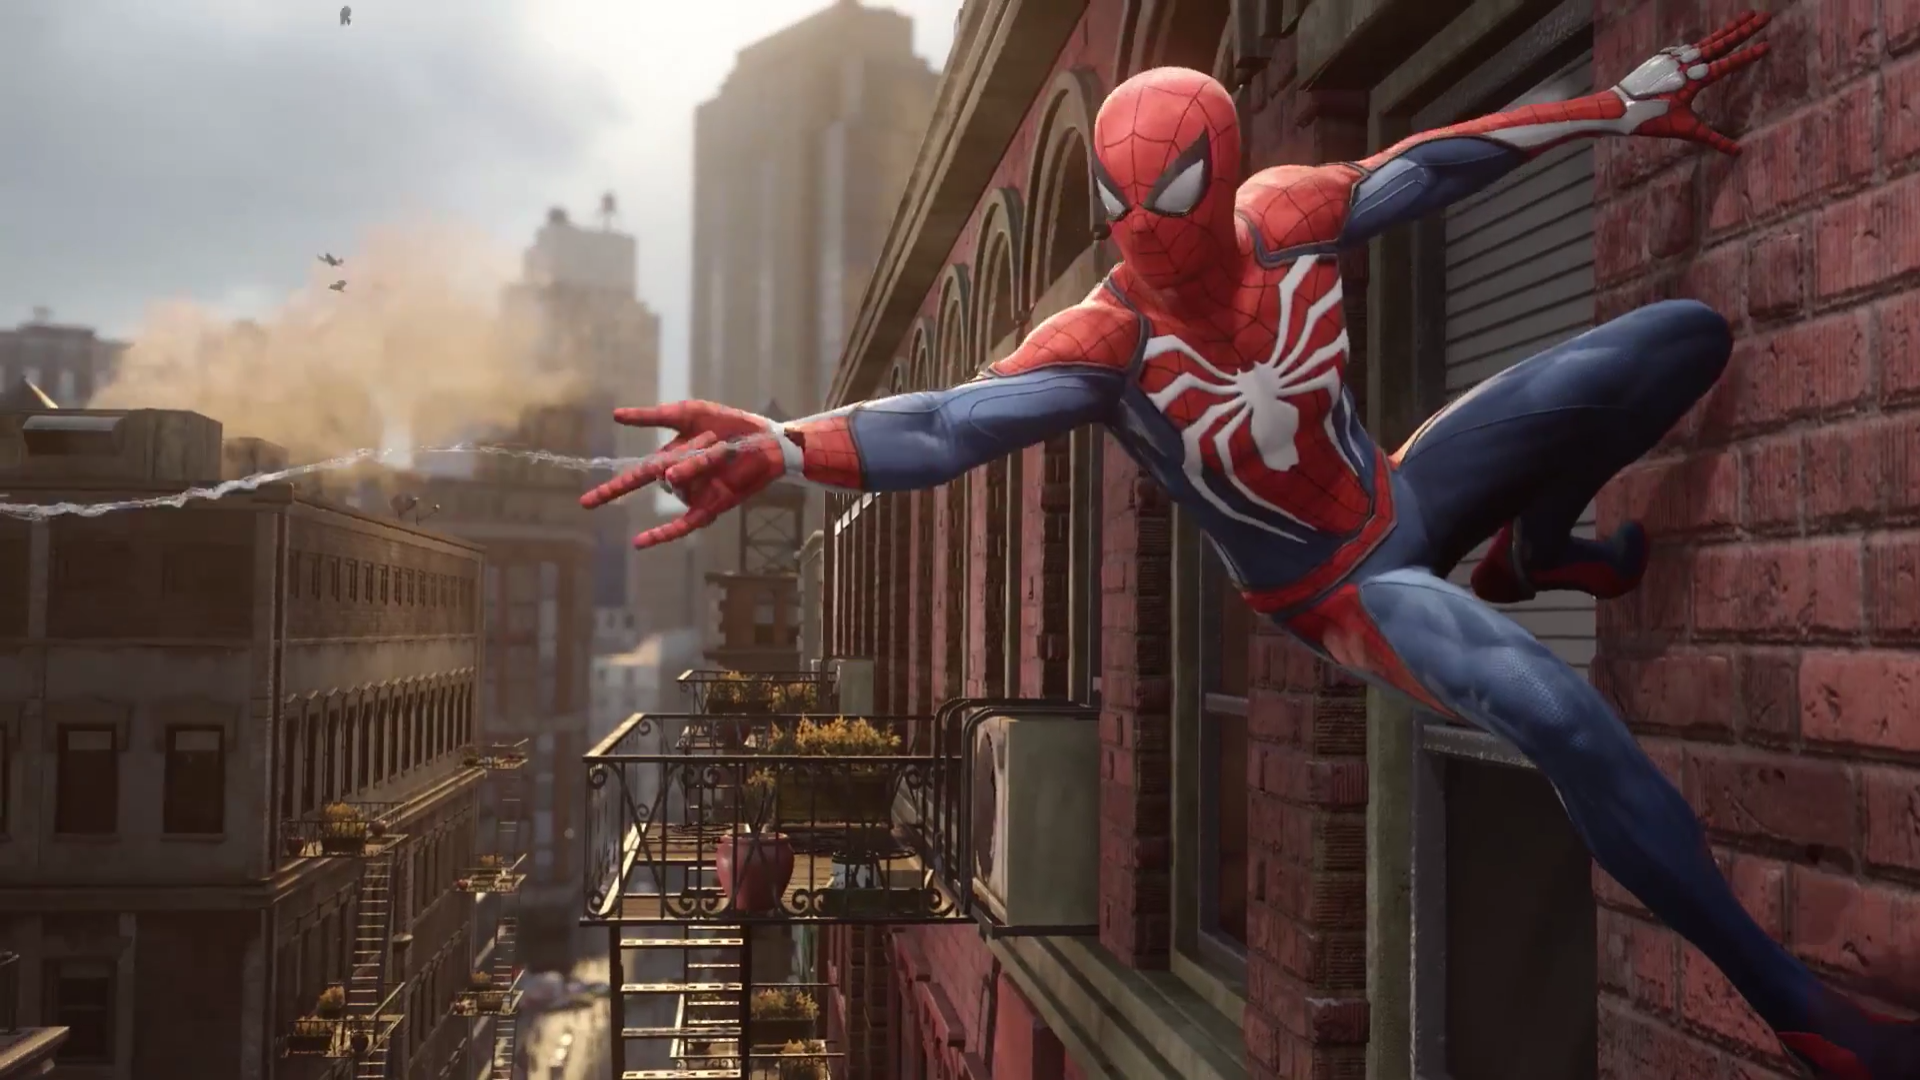 SPIDER MAN FOR ANDROID - APK Download for Android